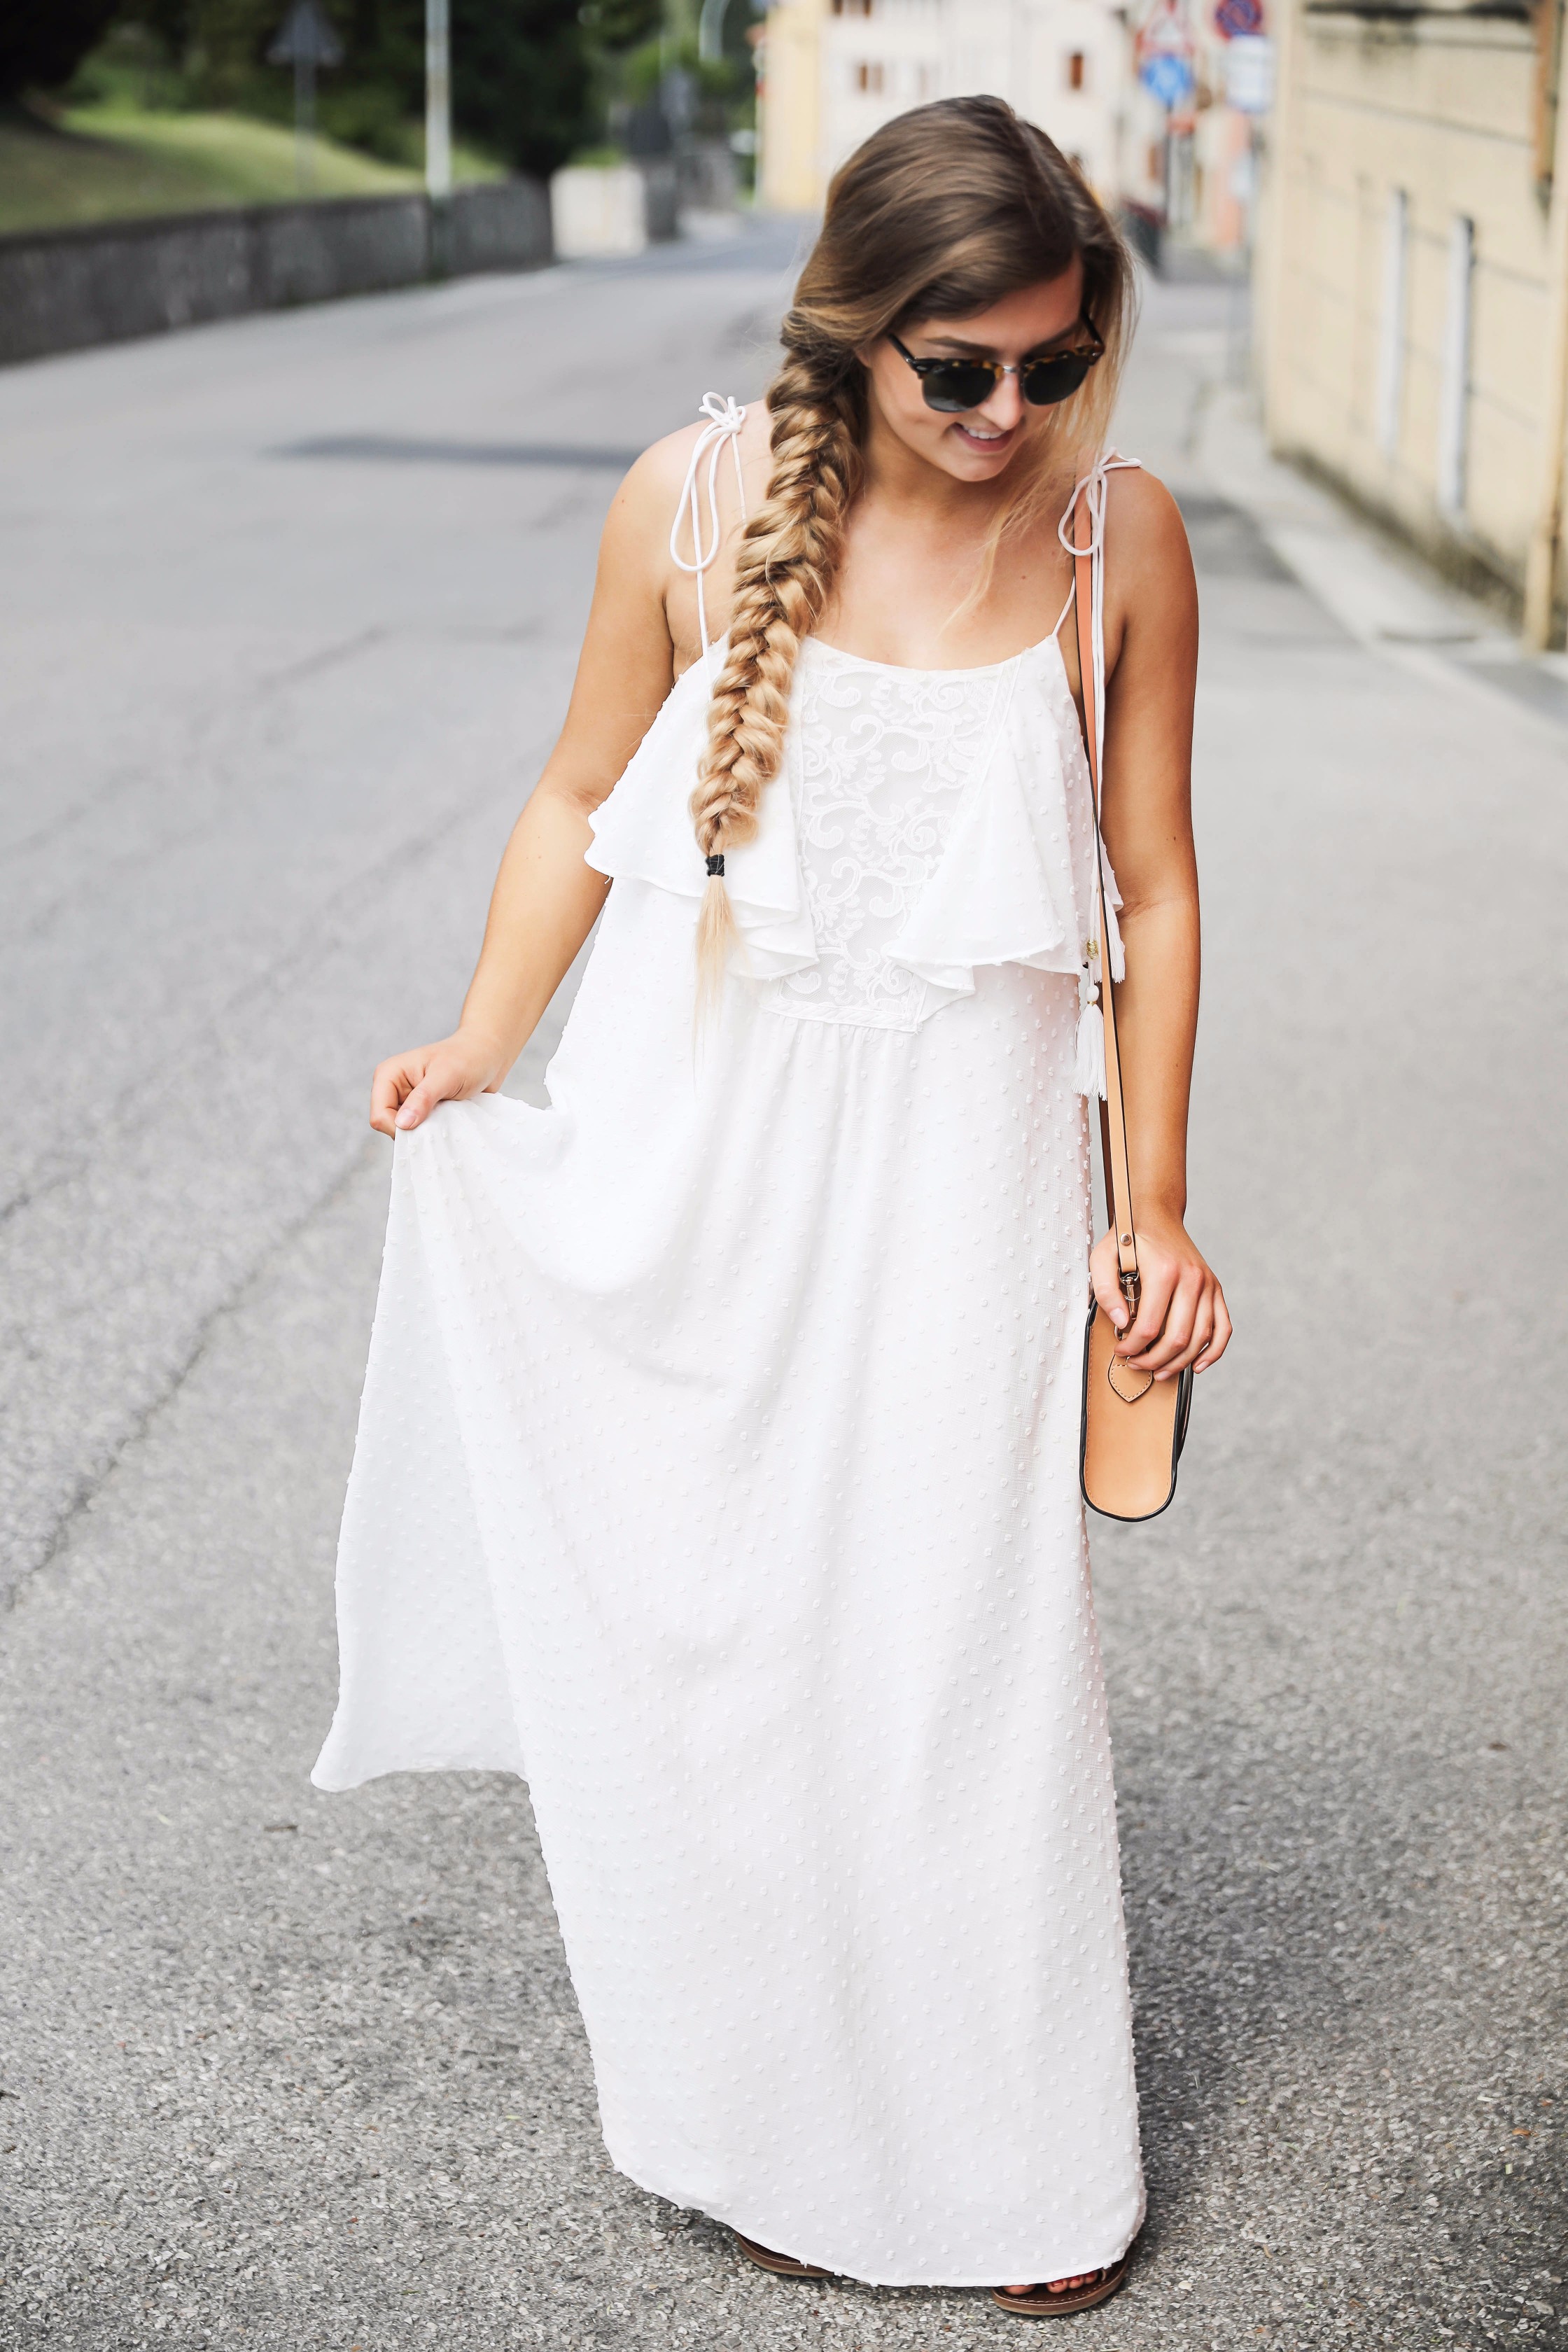 The Cutest White Maxi Dress | OOTD Paderno Del Grappa, Italy | Lauren ...